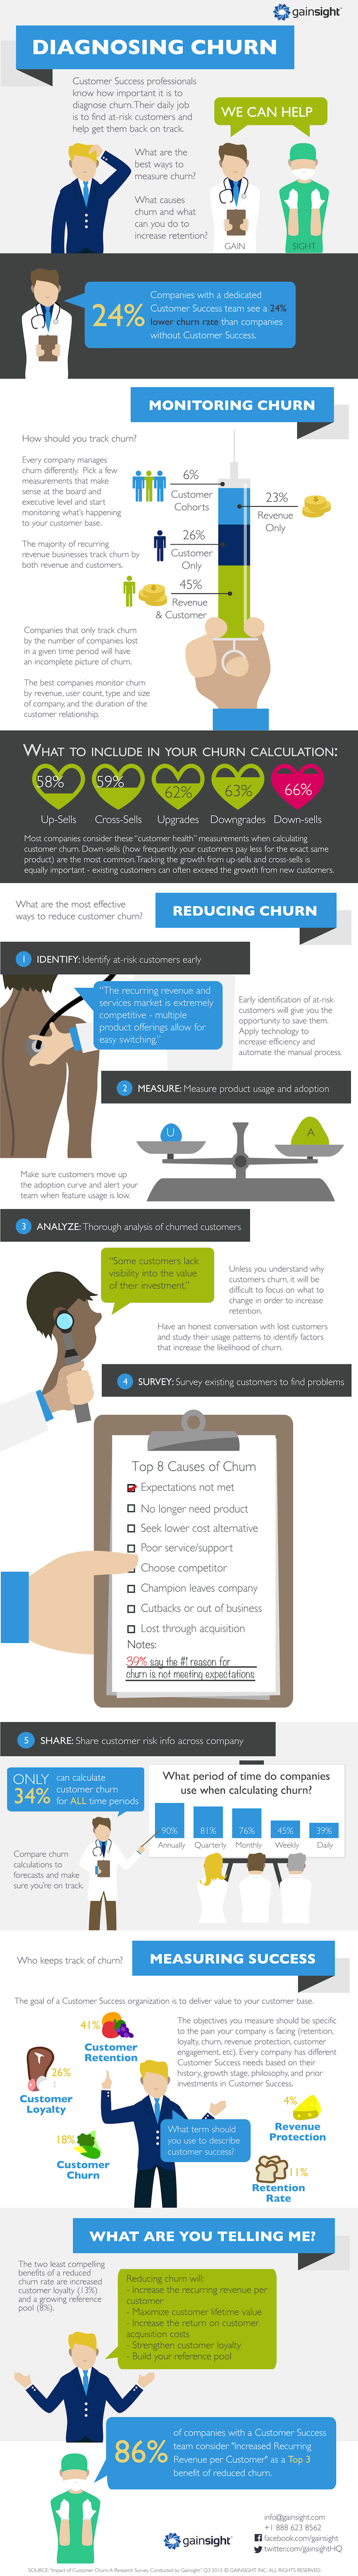 Churn Infographic from GainSight